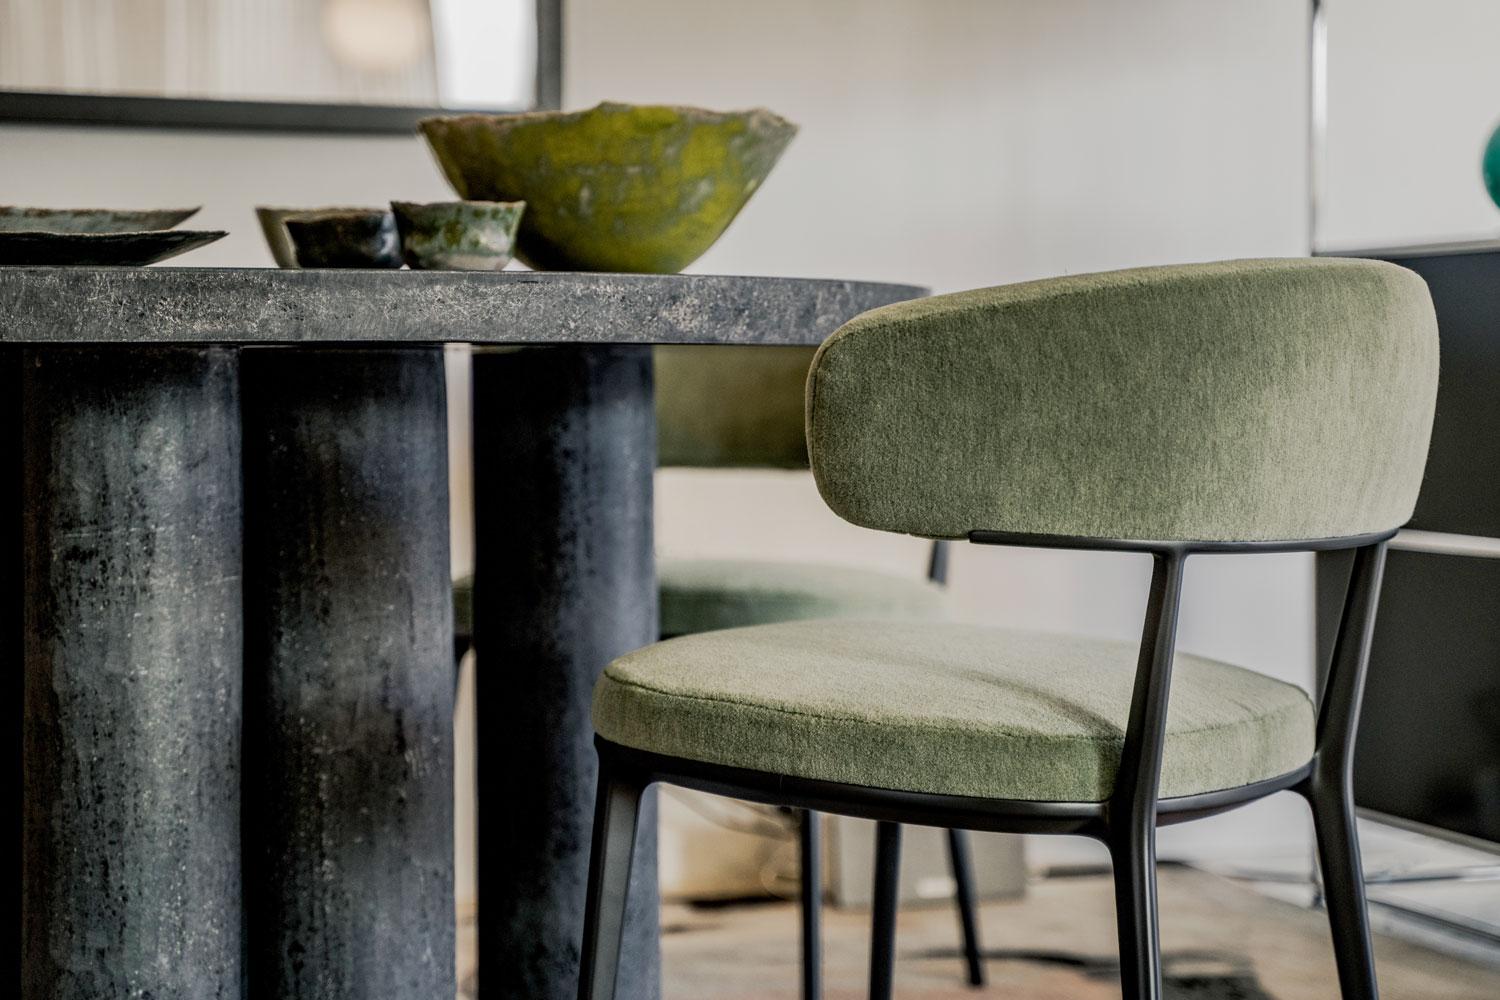 Contemporary Caratos Dining Chair in Sage-colored Velvet by Maxalto - Available Now